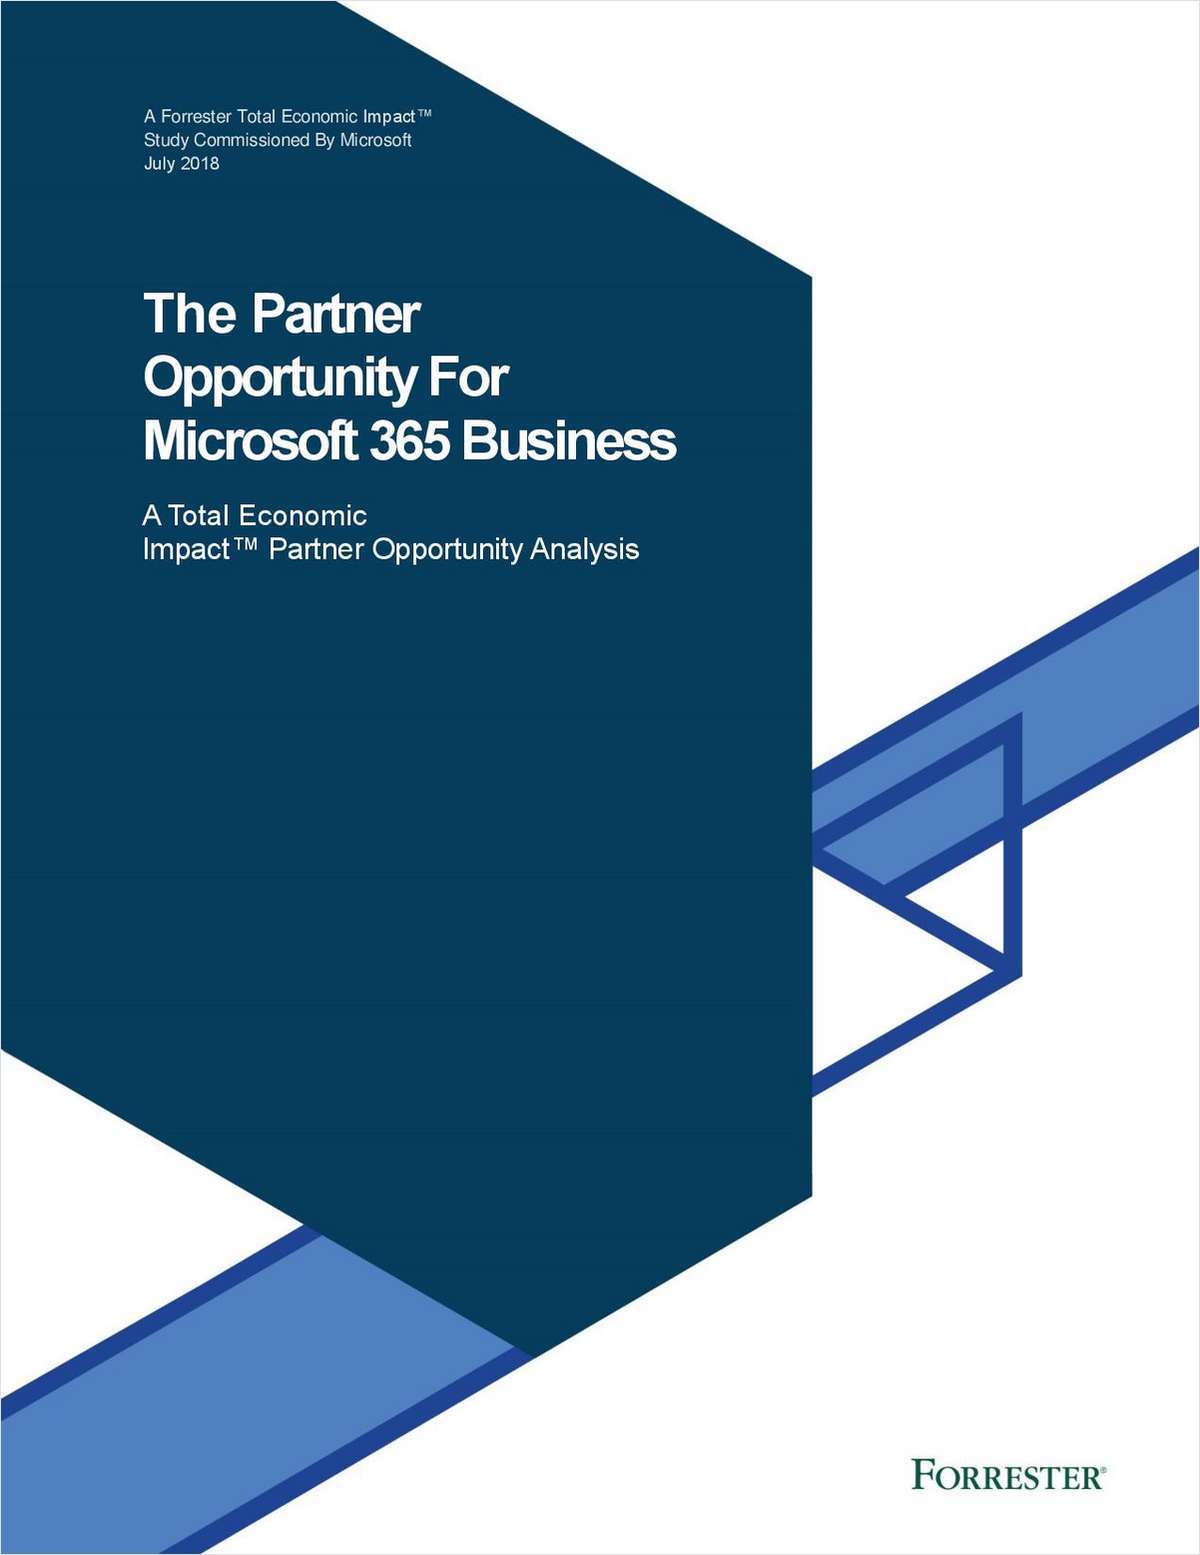 The Partner Opportunity For Microsoft 365 Business